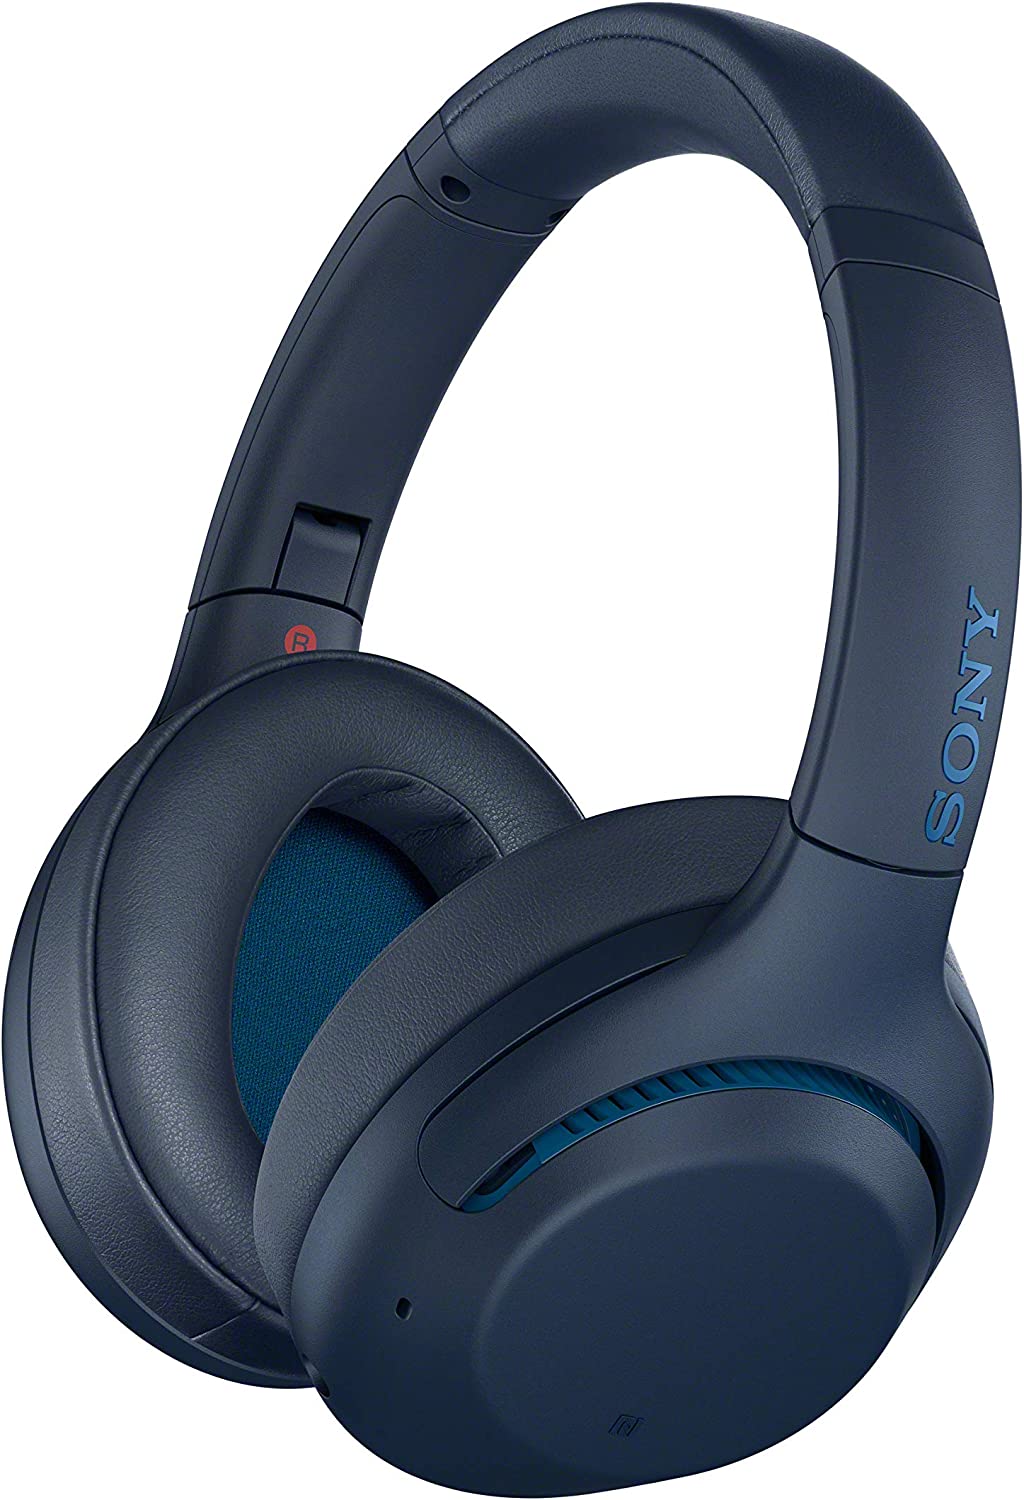 Sony WHXB900N Noise Cancelling Headphones, Wireless Bluetooth Over the Ear Headset - Blue (Amazon Exclusive) - Review